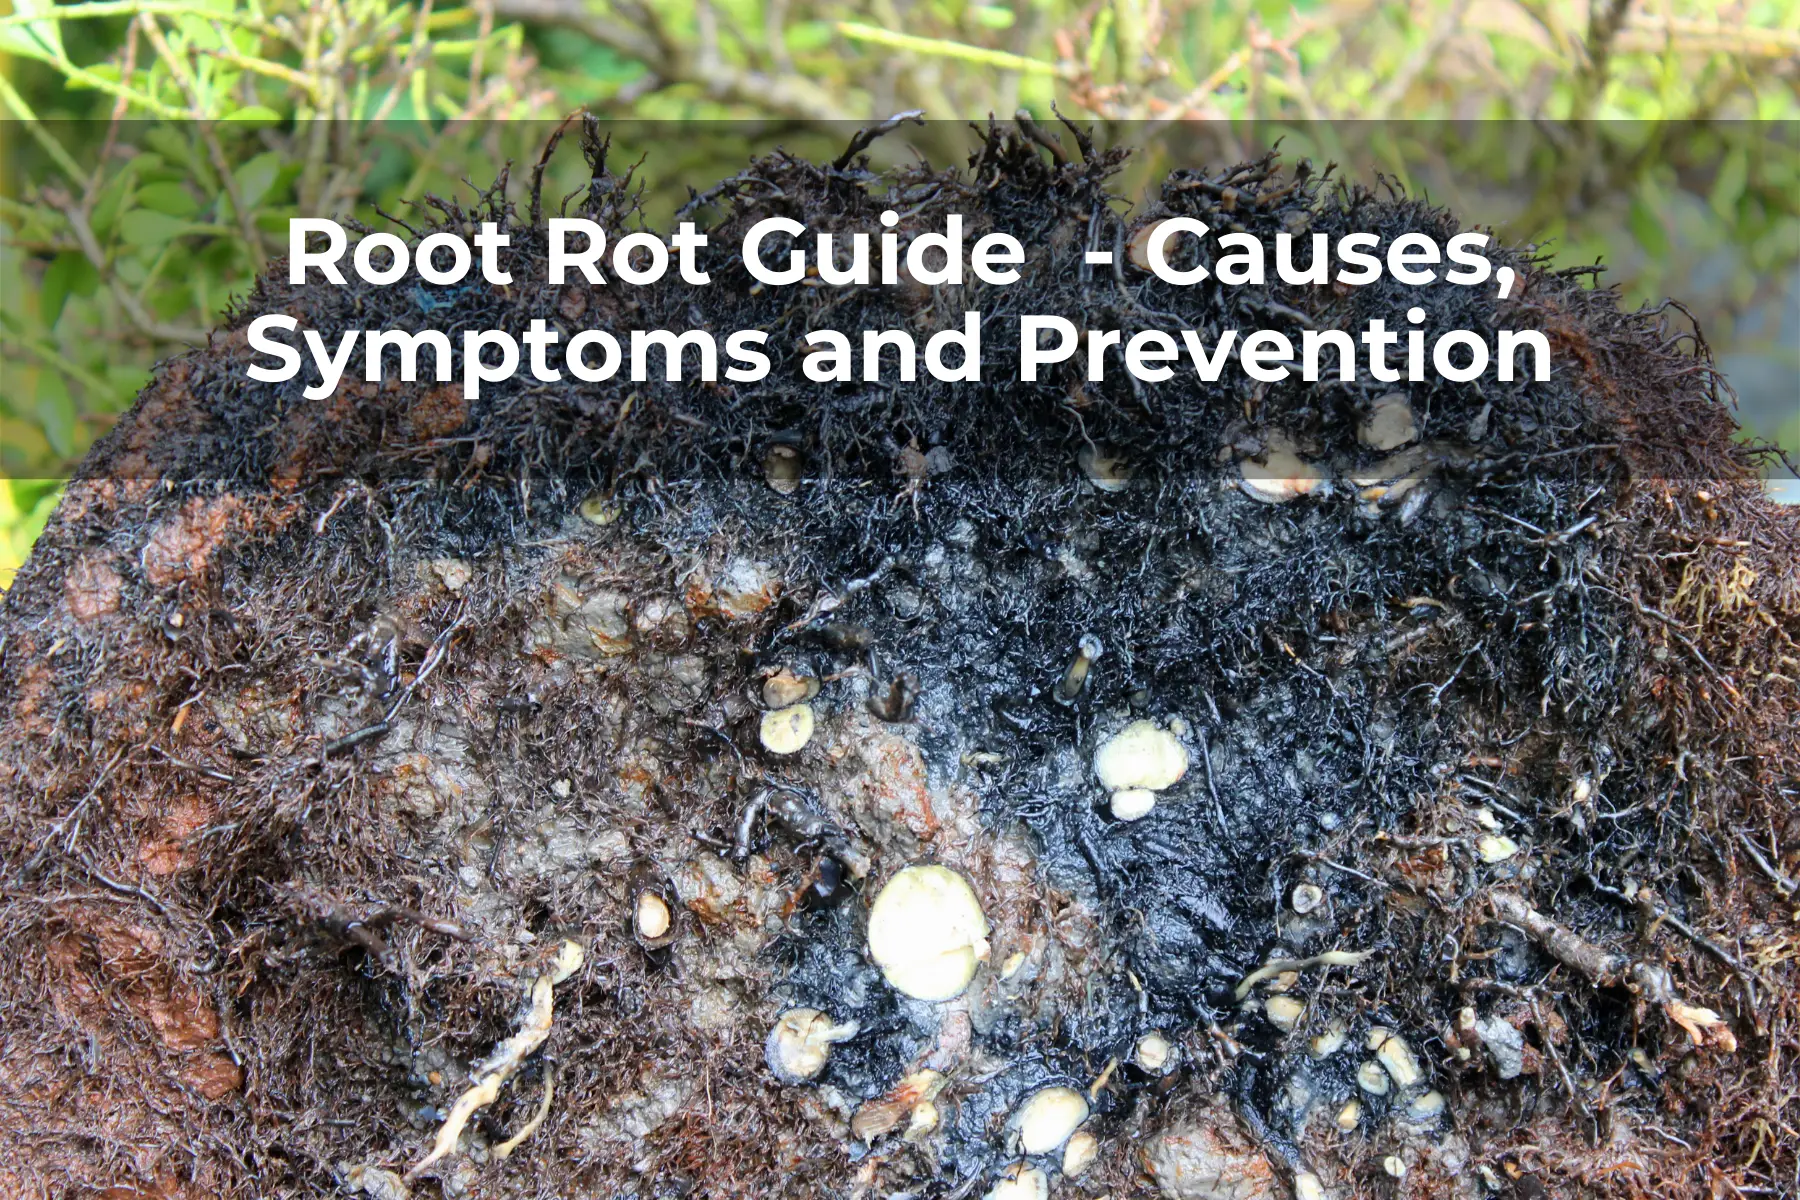 Root Rot Guide - Causes, Symptoms and Prevention